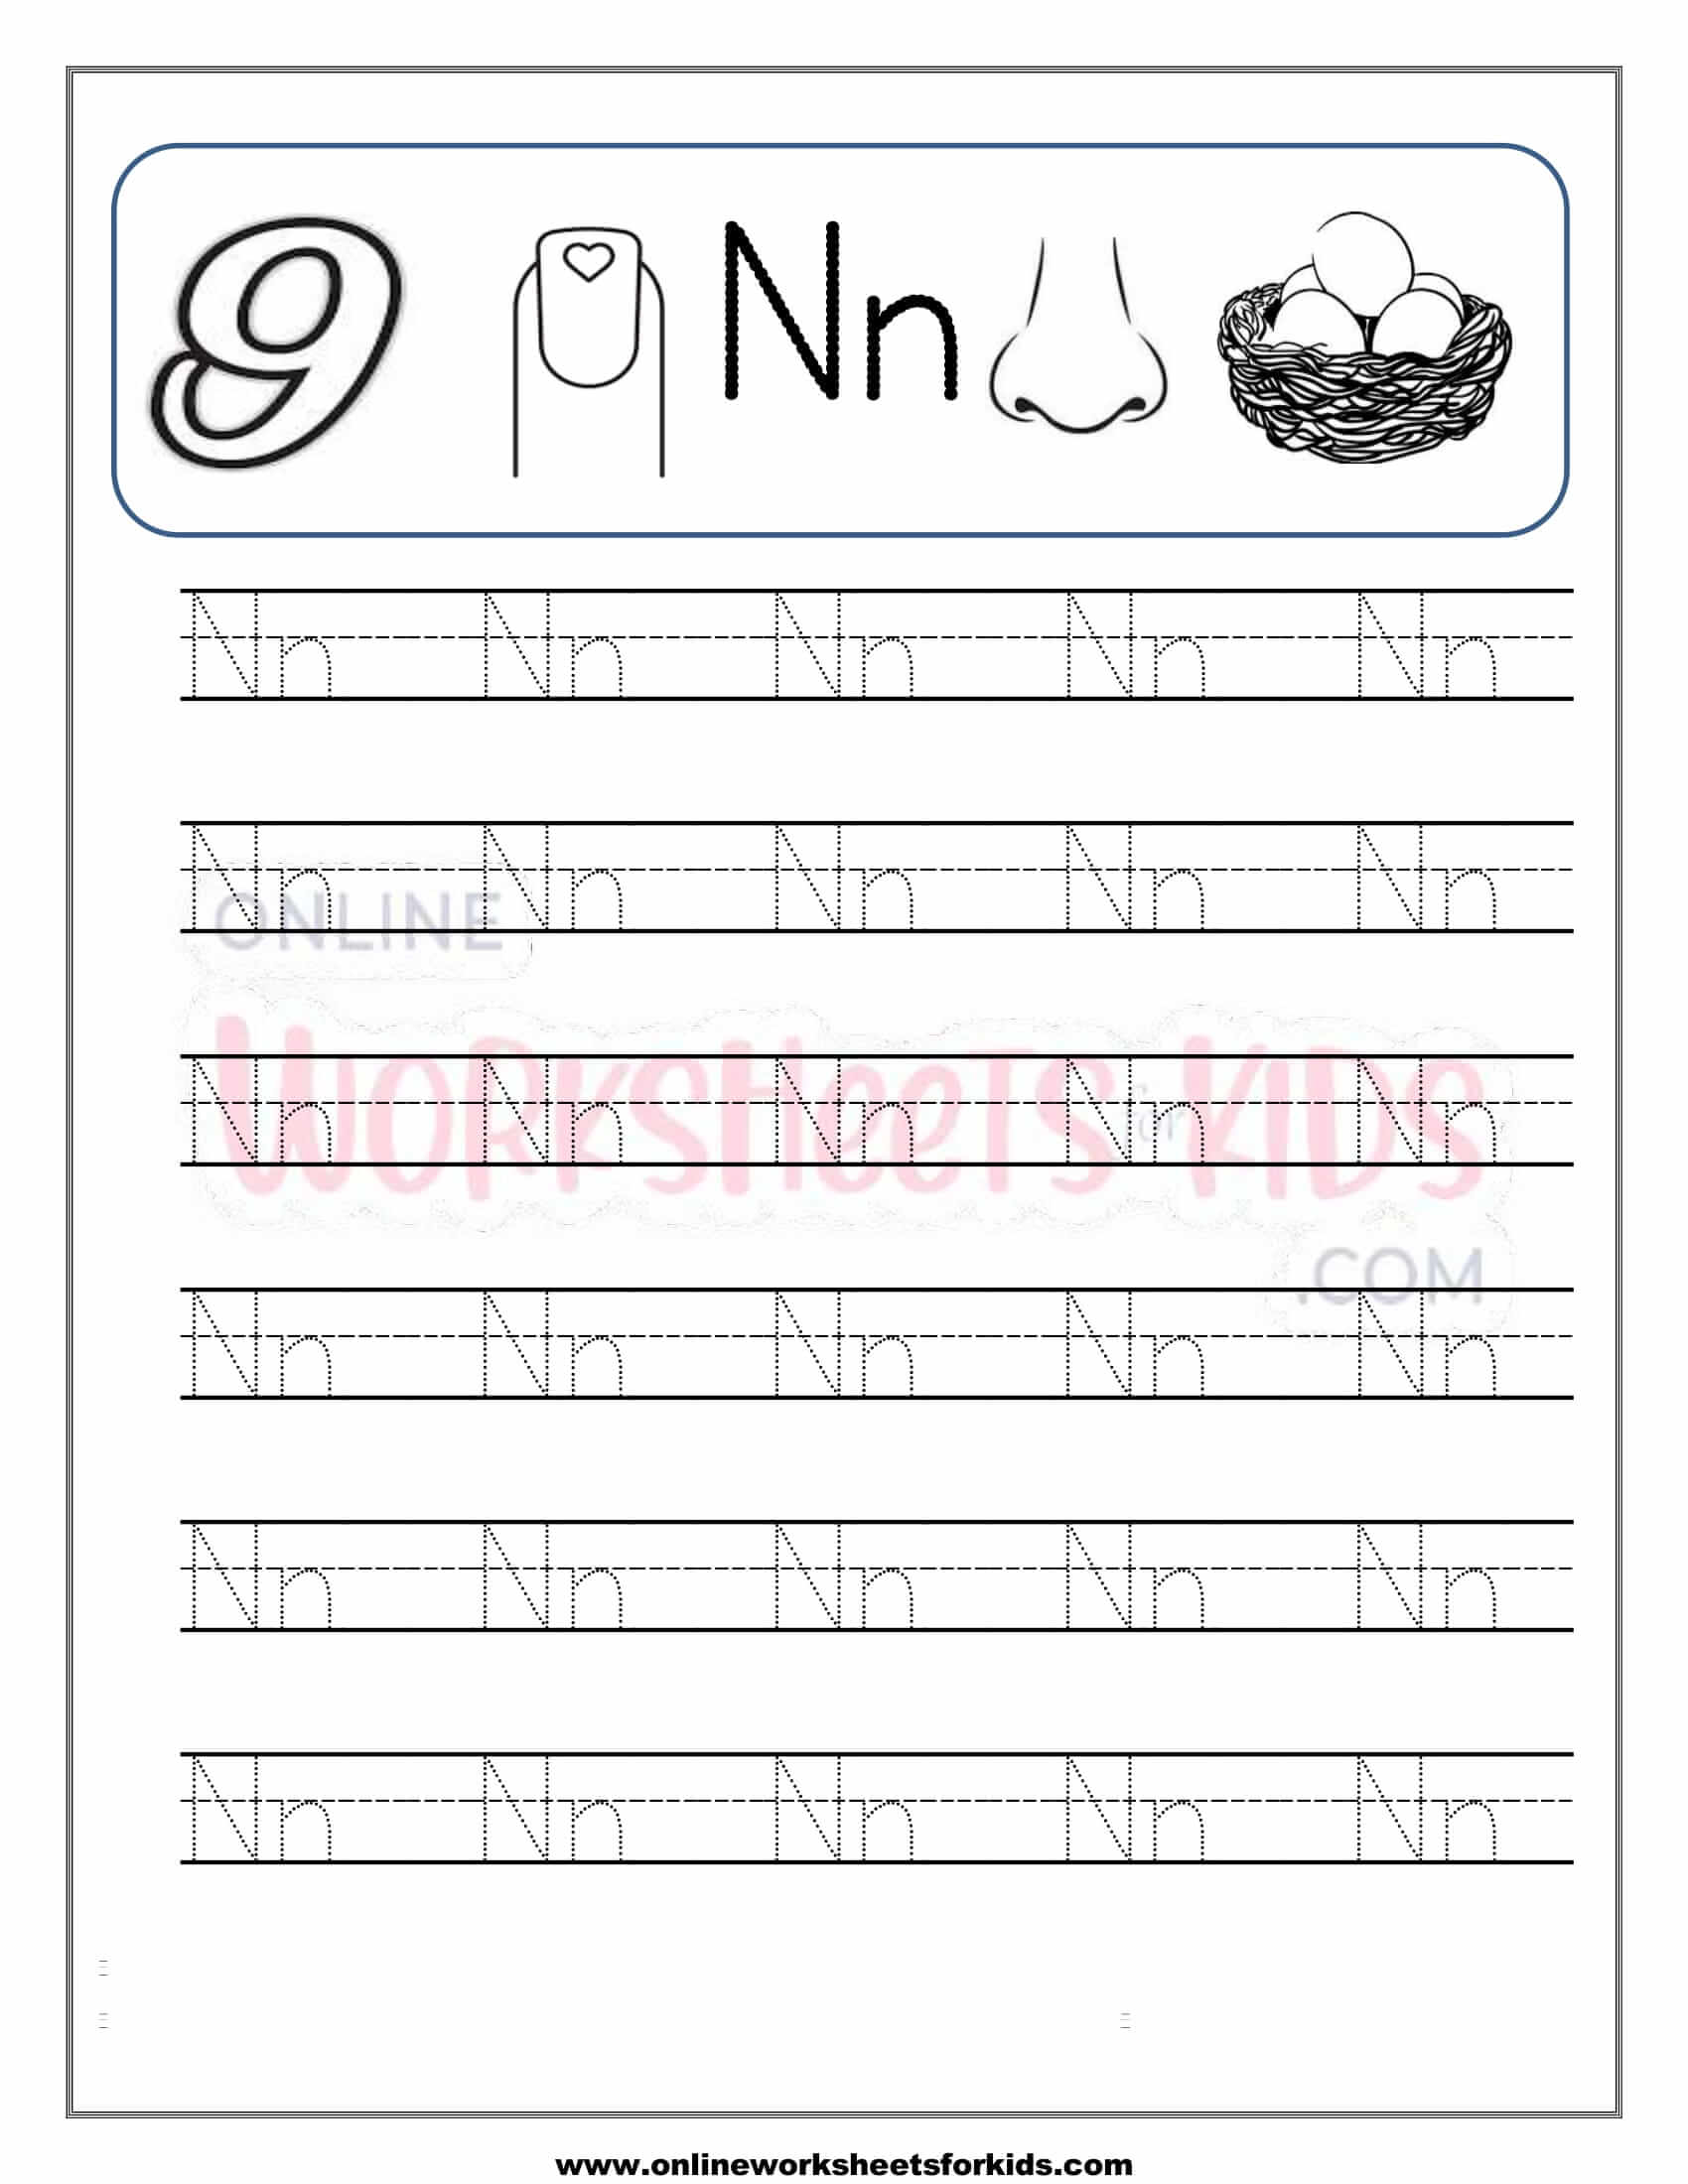 capital-and-small-letter-tracing-worksheet-14